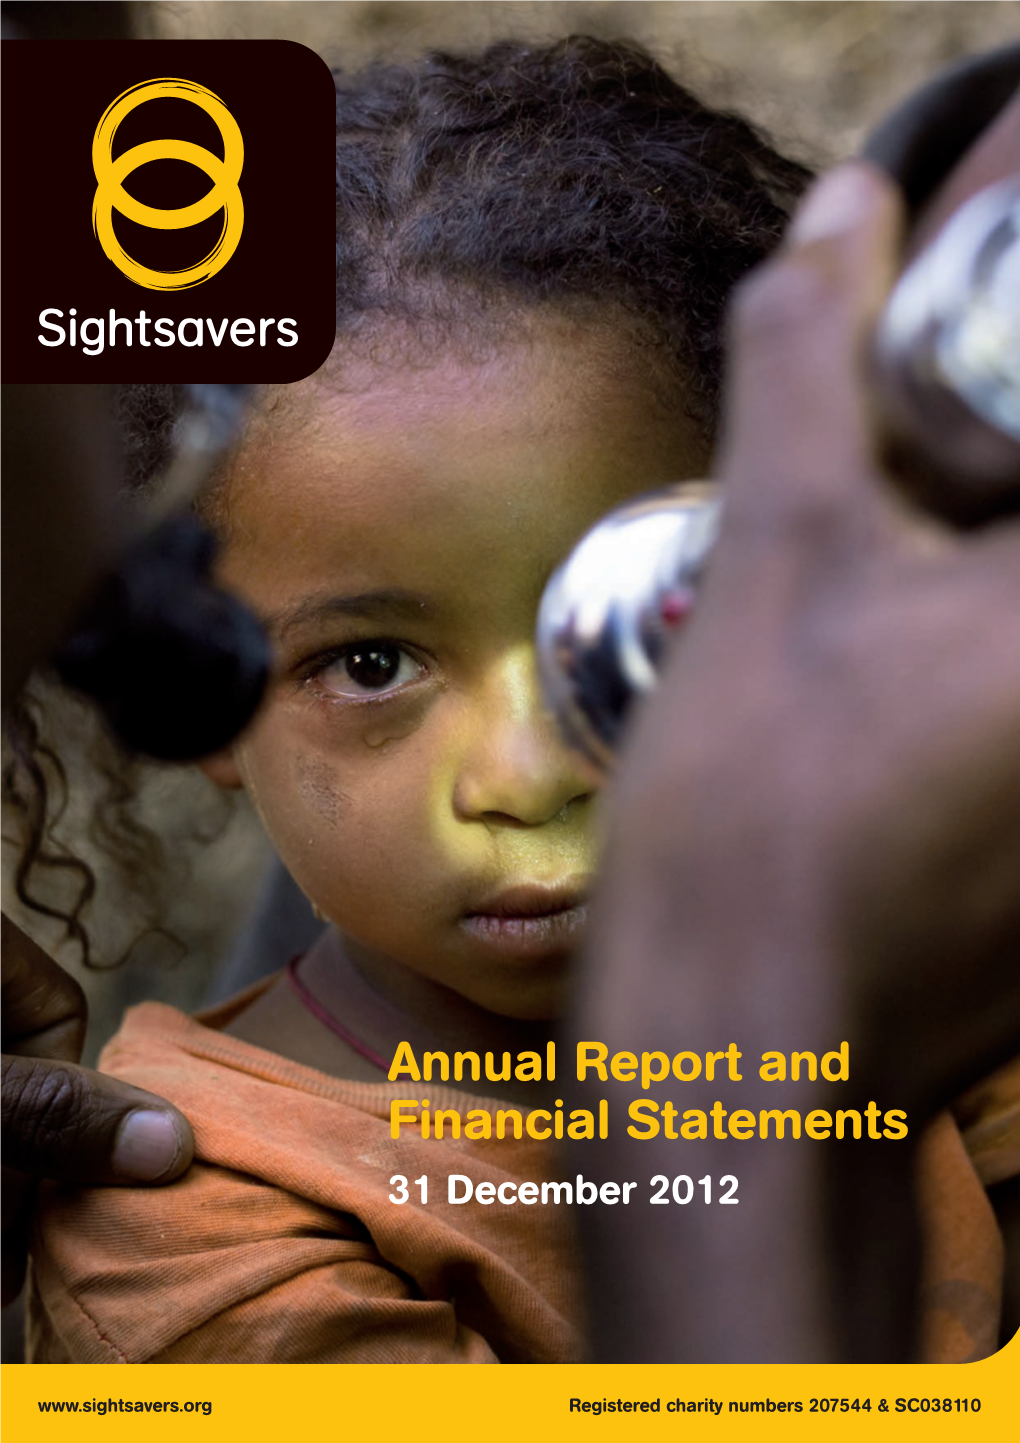 Annual Report and Financial Statements 31 December 2012